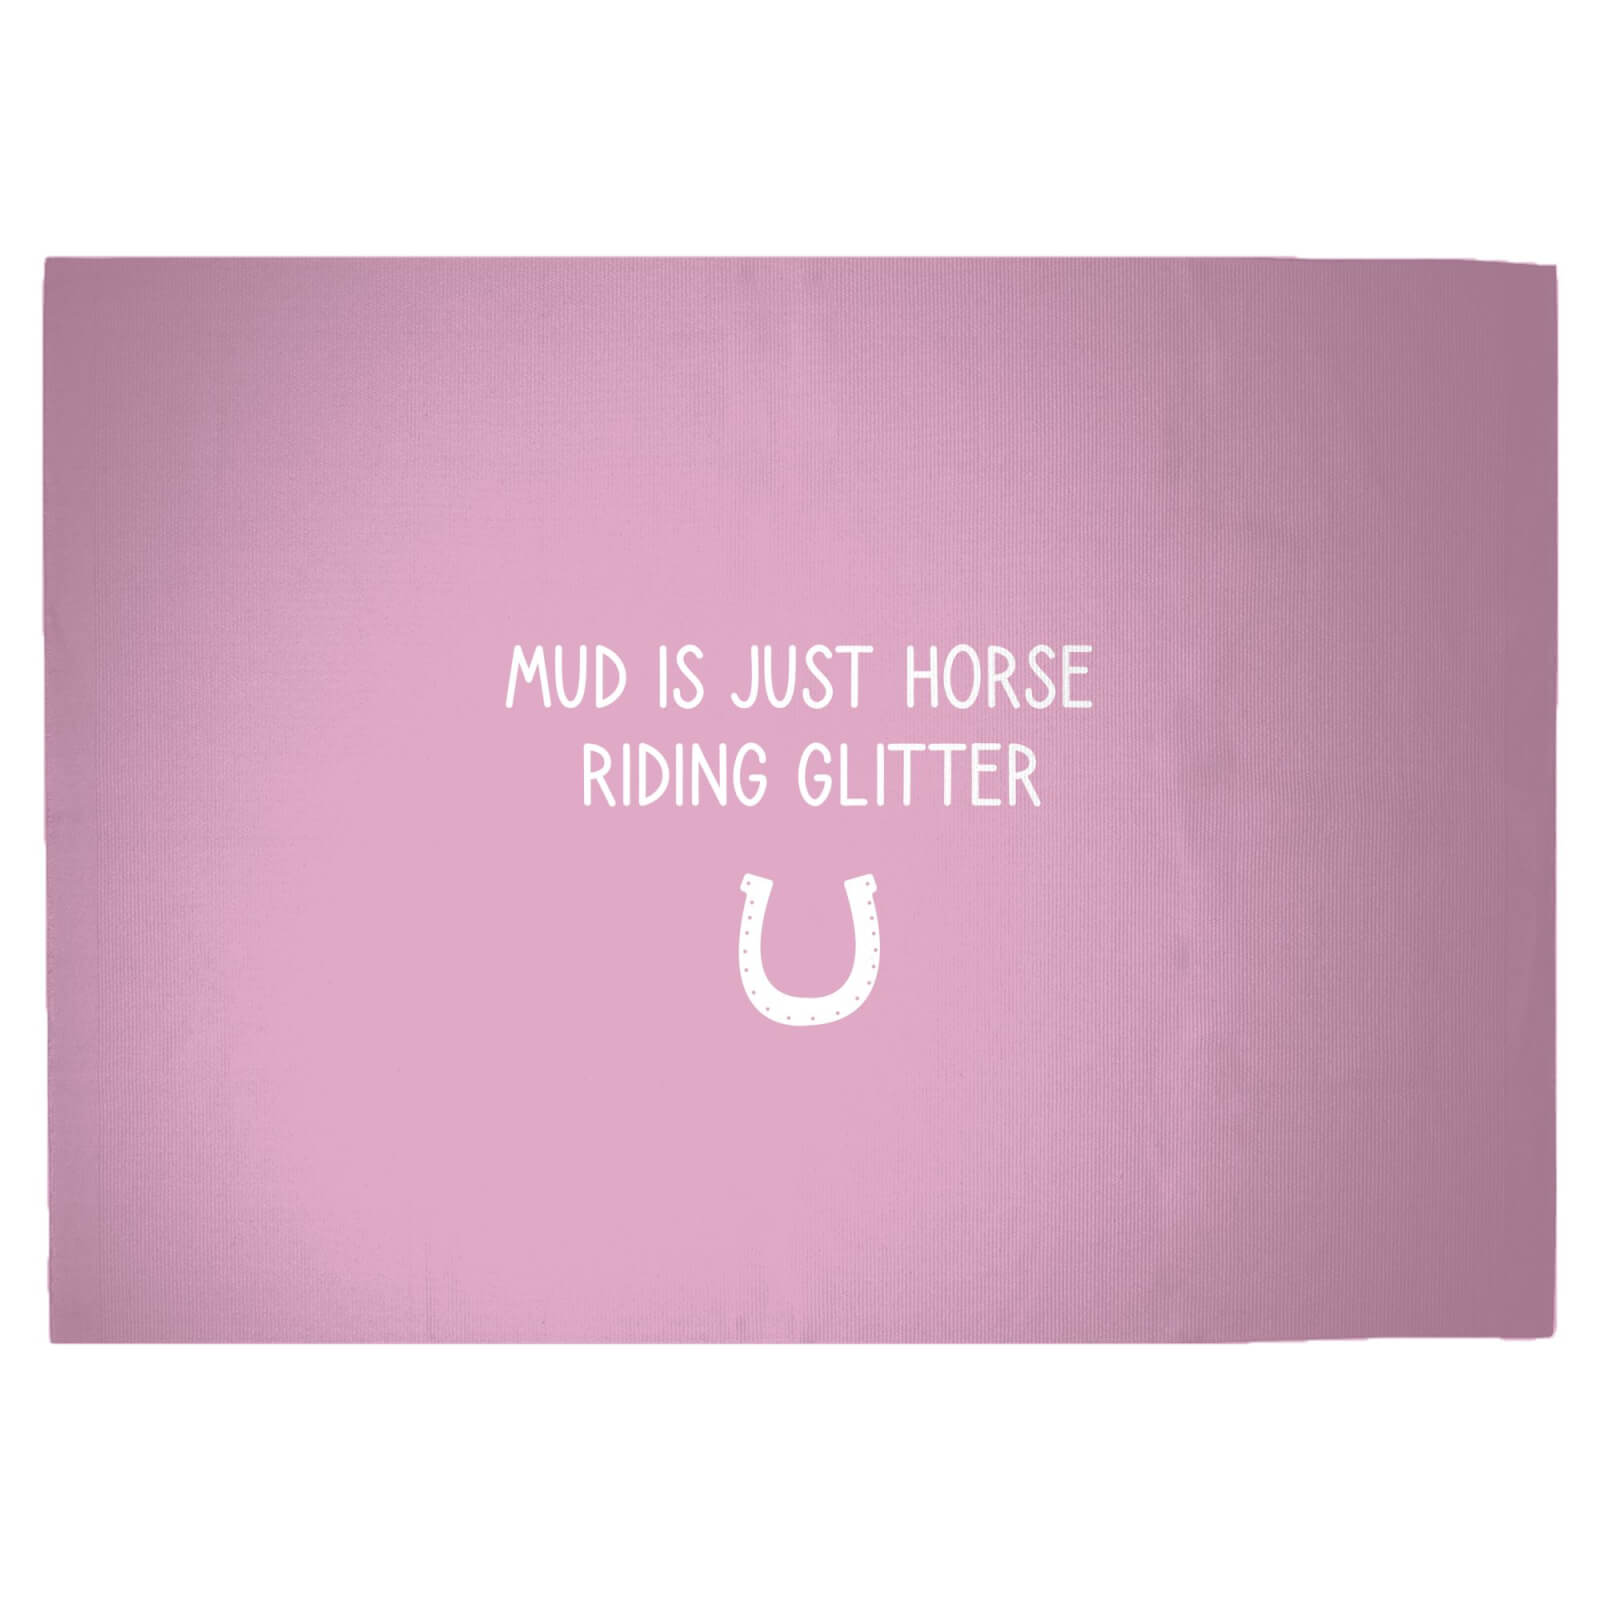 Mud Is Just Horse Riding Glitter Woven Rug - Large